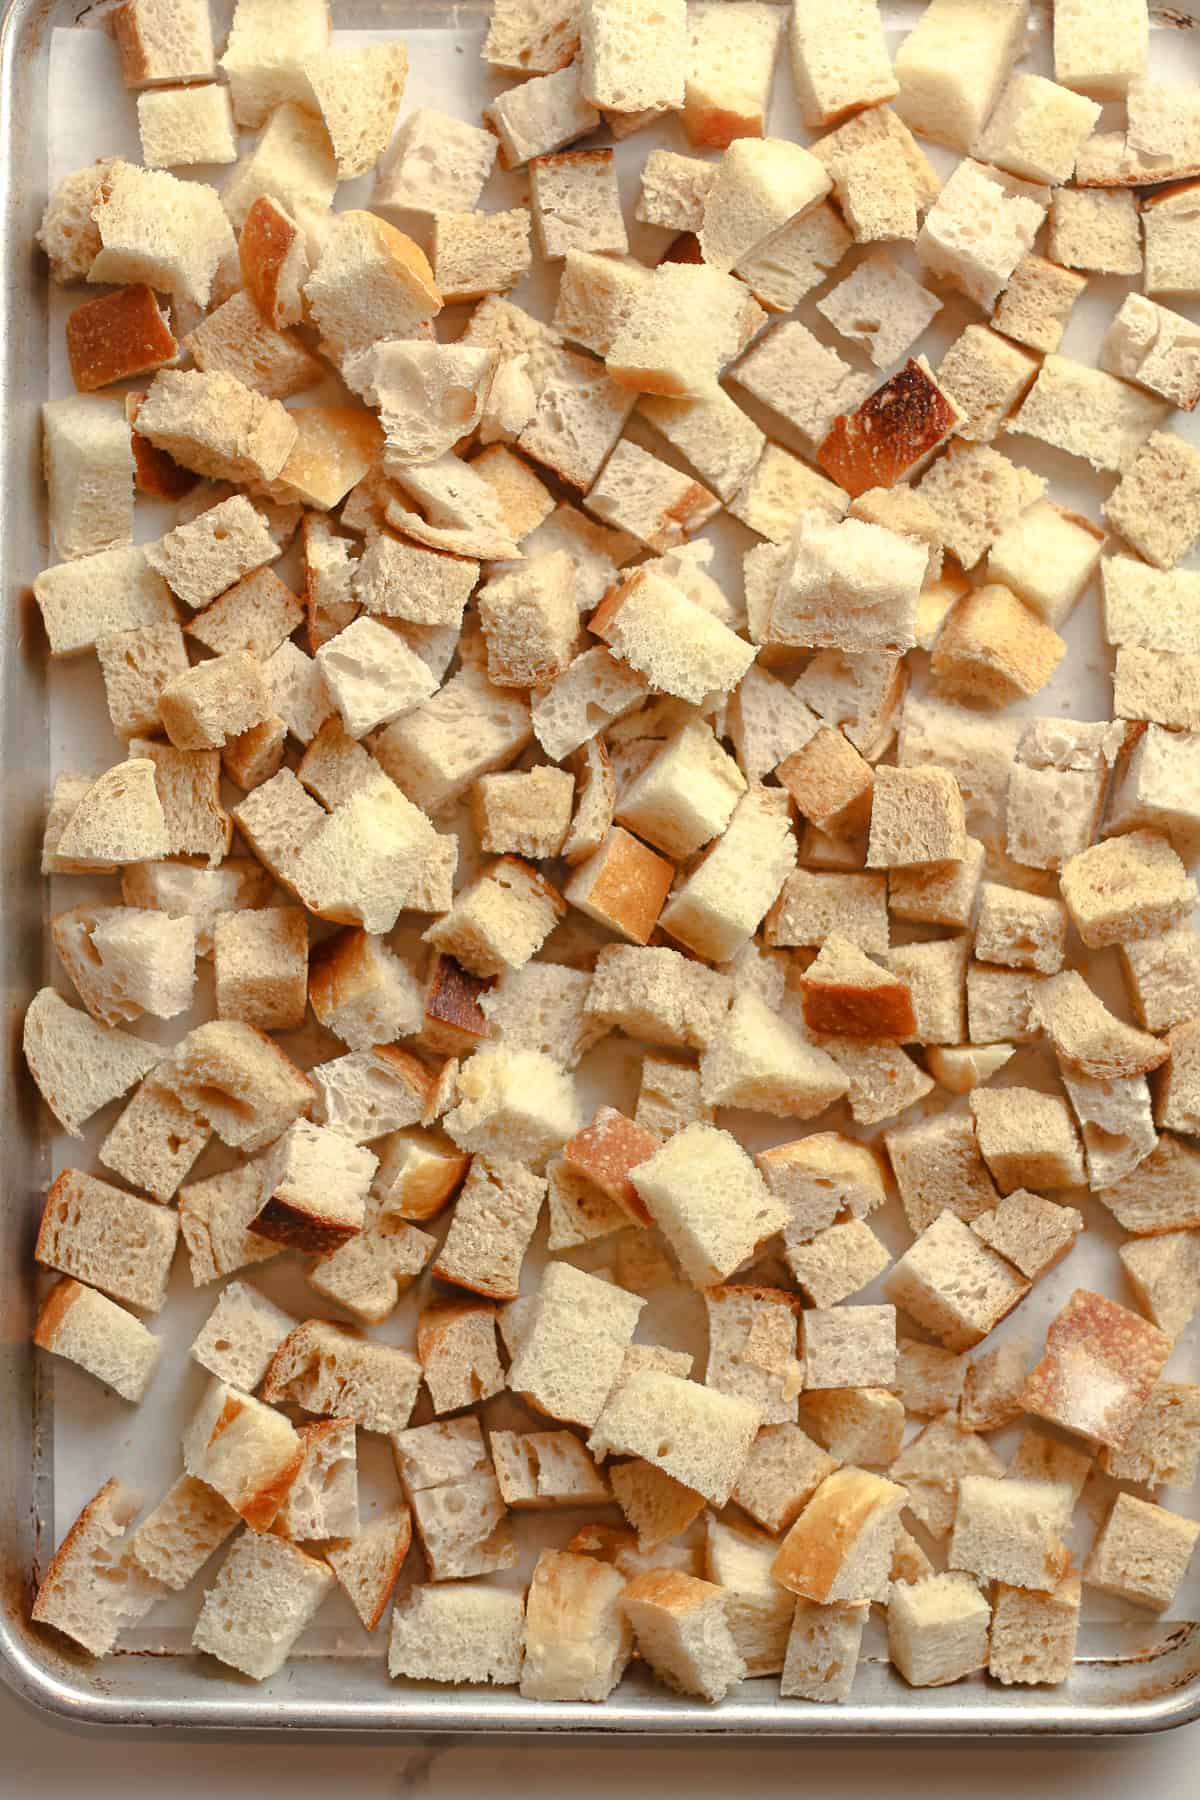 A pan of the dried and cubed bread.